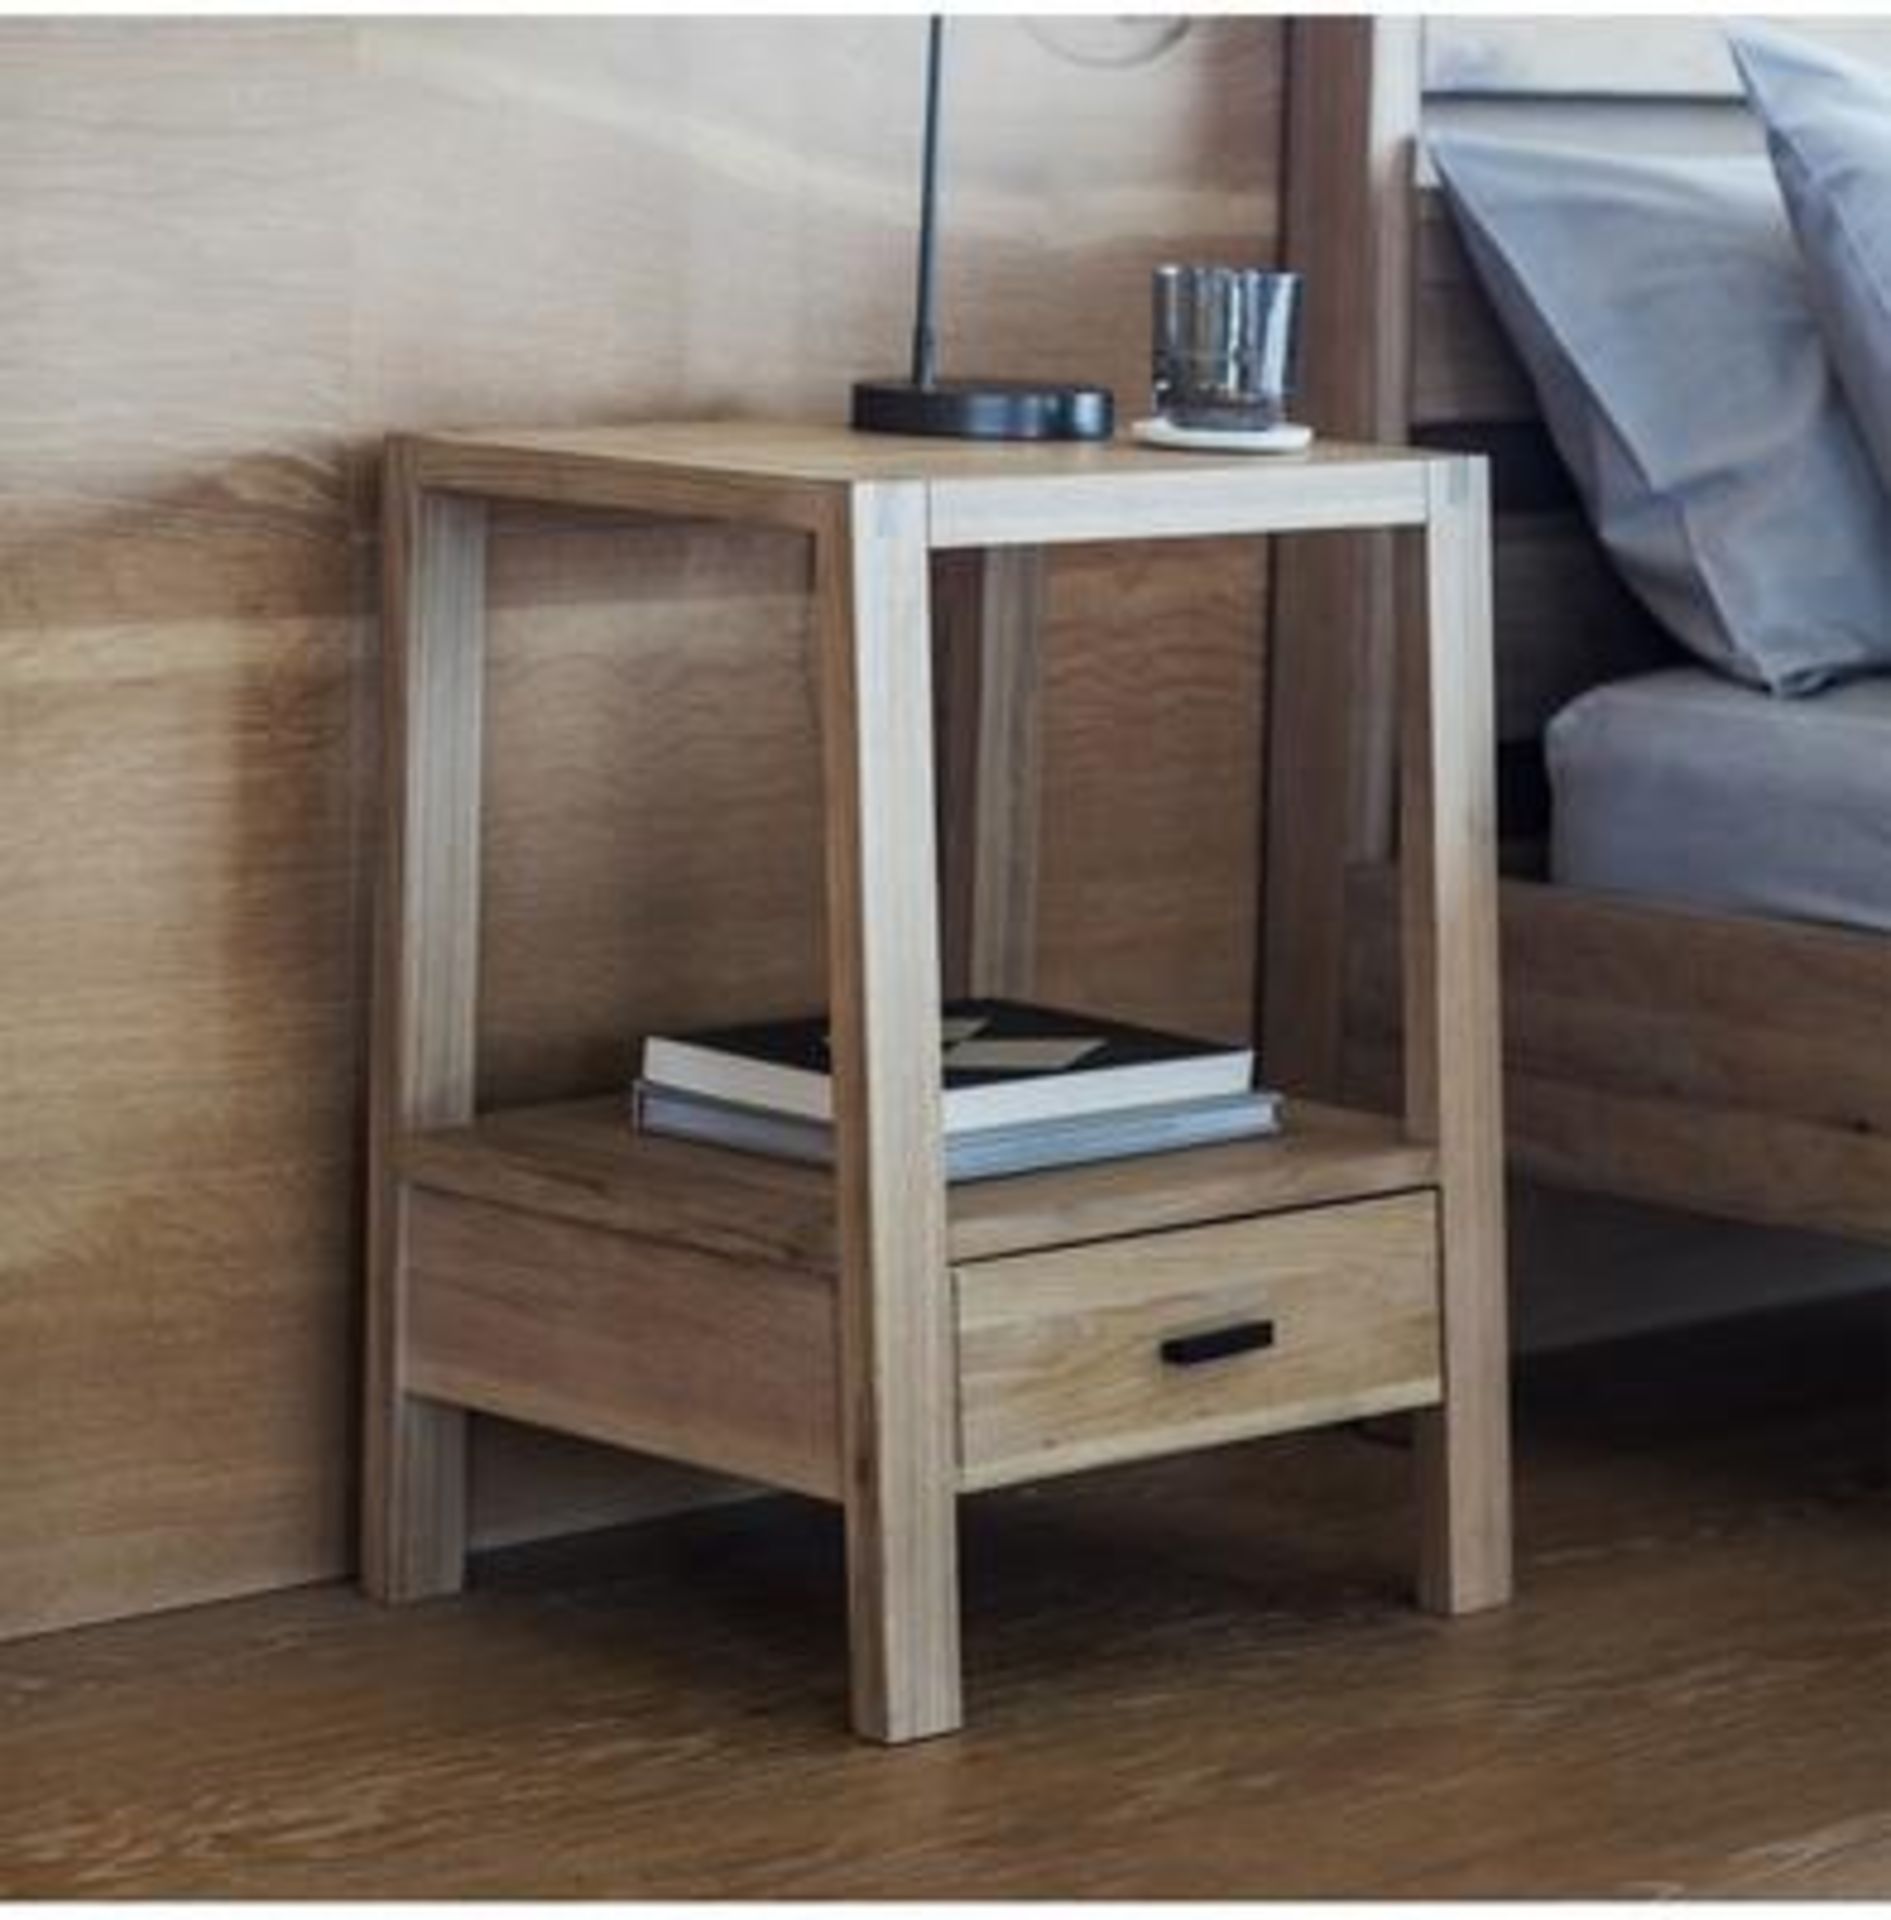 Kielder Bedside / Side Table Honest and solid, the Kielder range is crafted from beautiful mellow